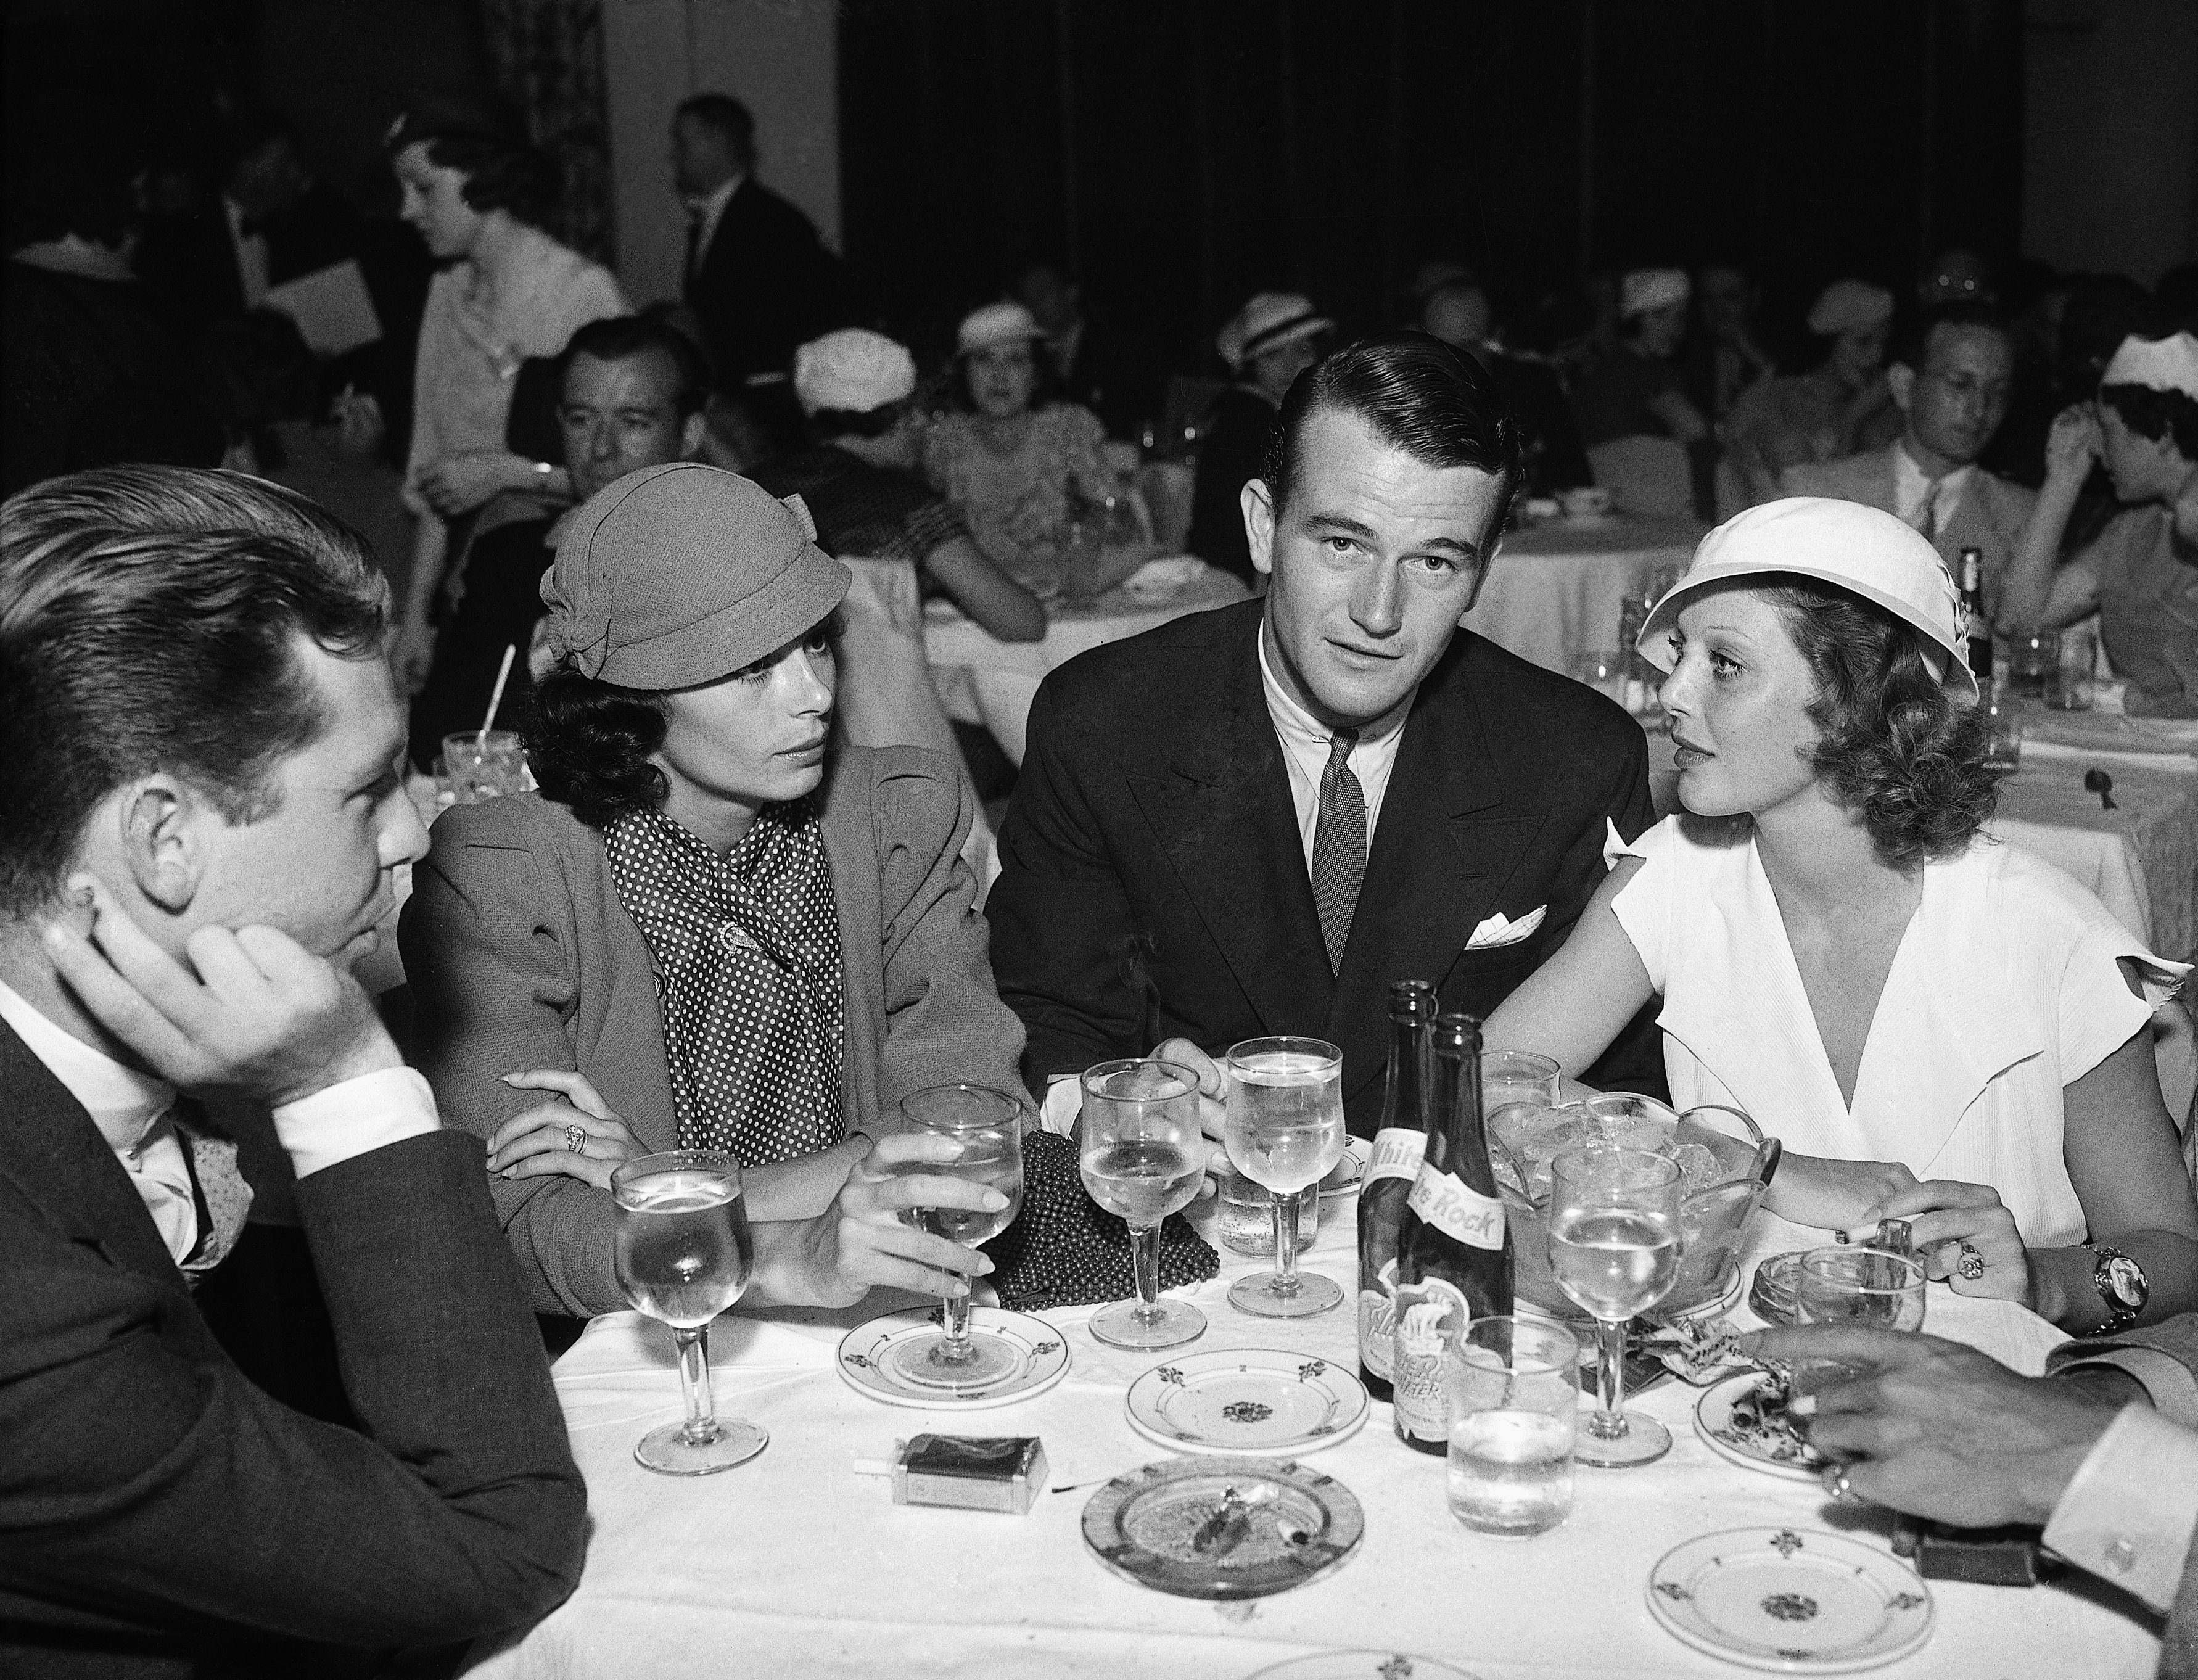 John Wayne, well-known screen actor, dines with his bride, the former Josephine Saenz, daughter of Dr. Jose S. Saenz, the Panamanian Consul in Los Angeles | Source: Getty Images